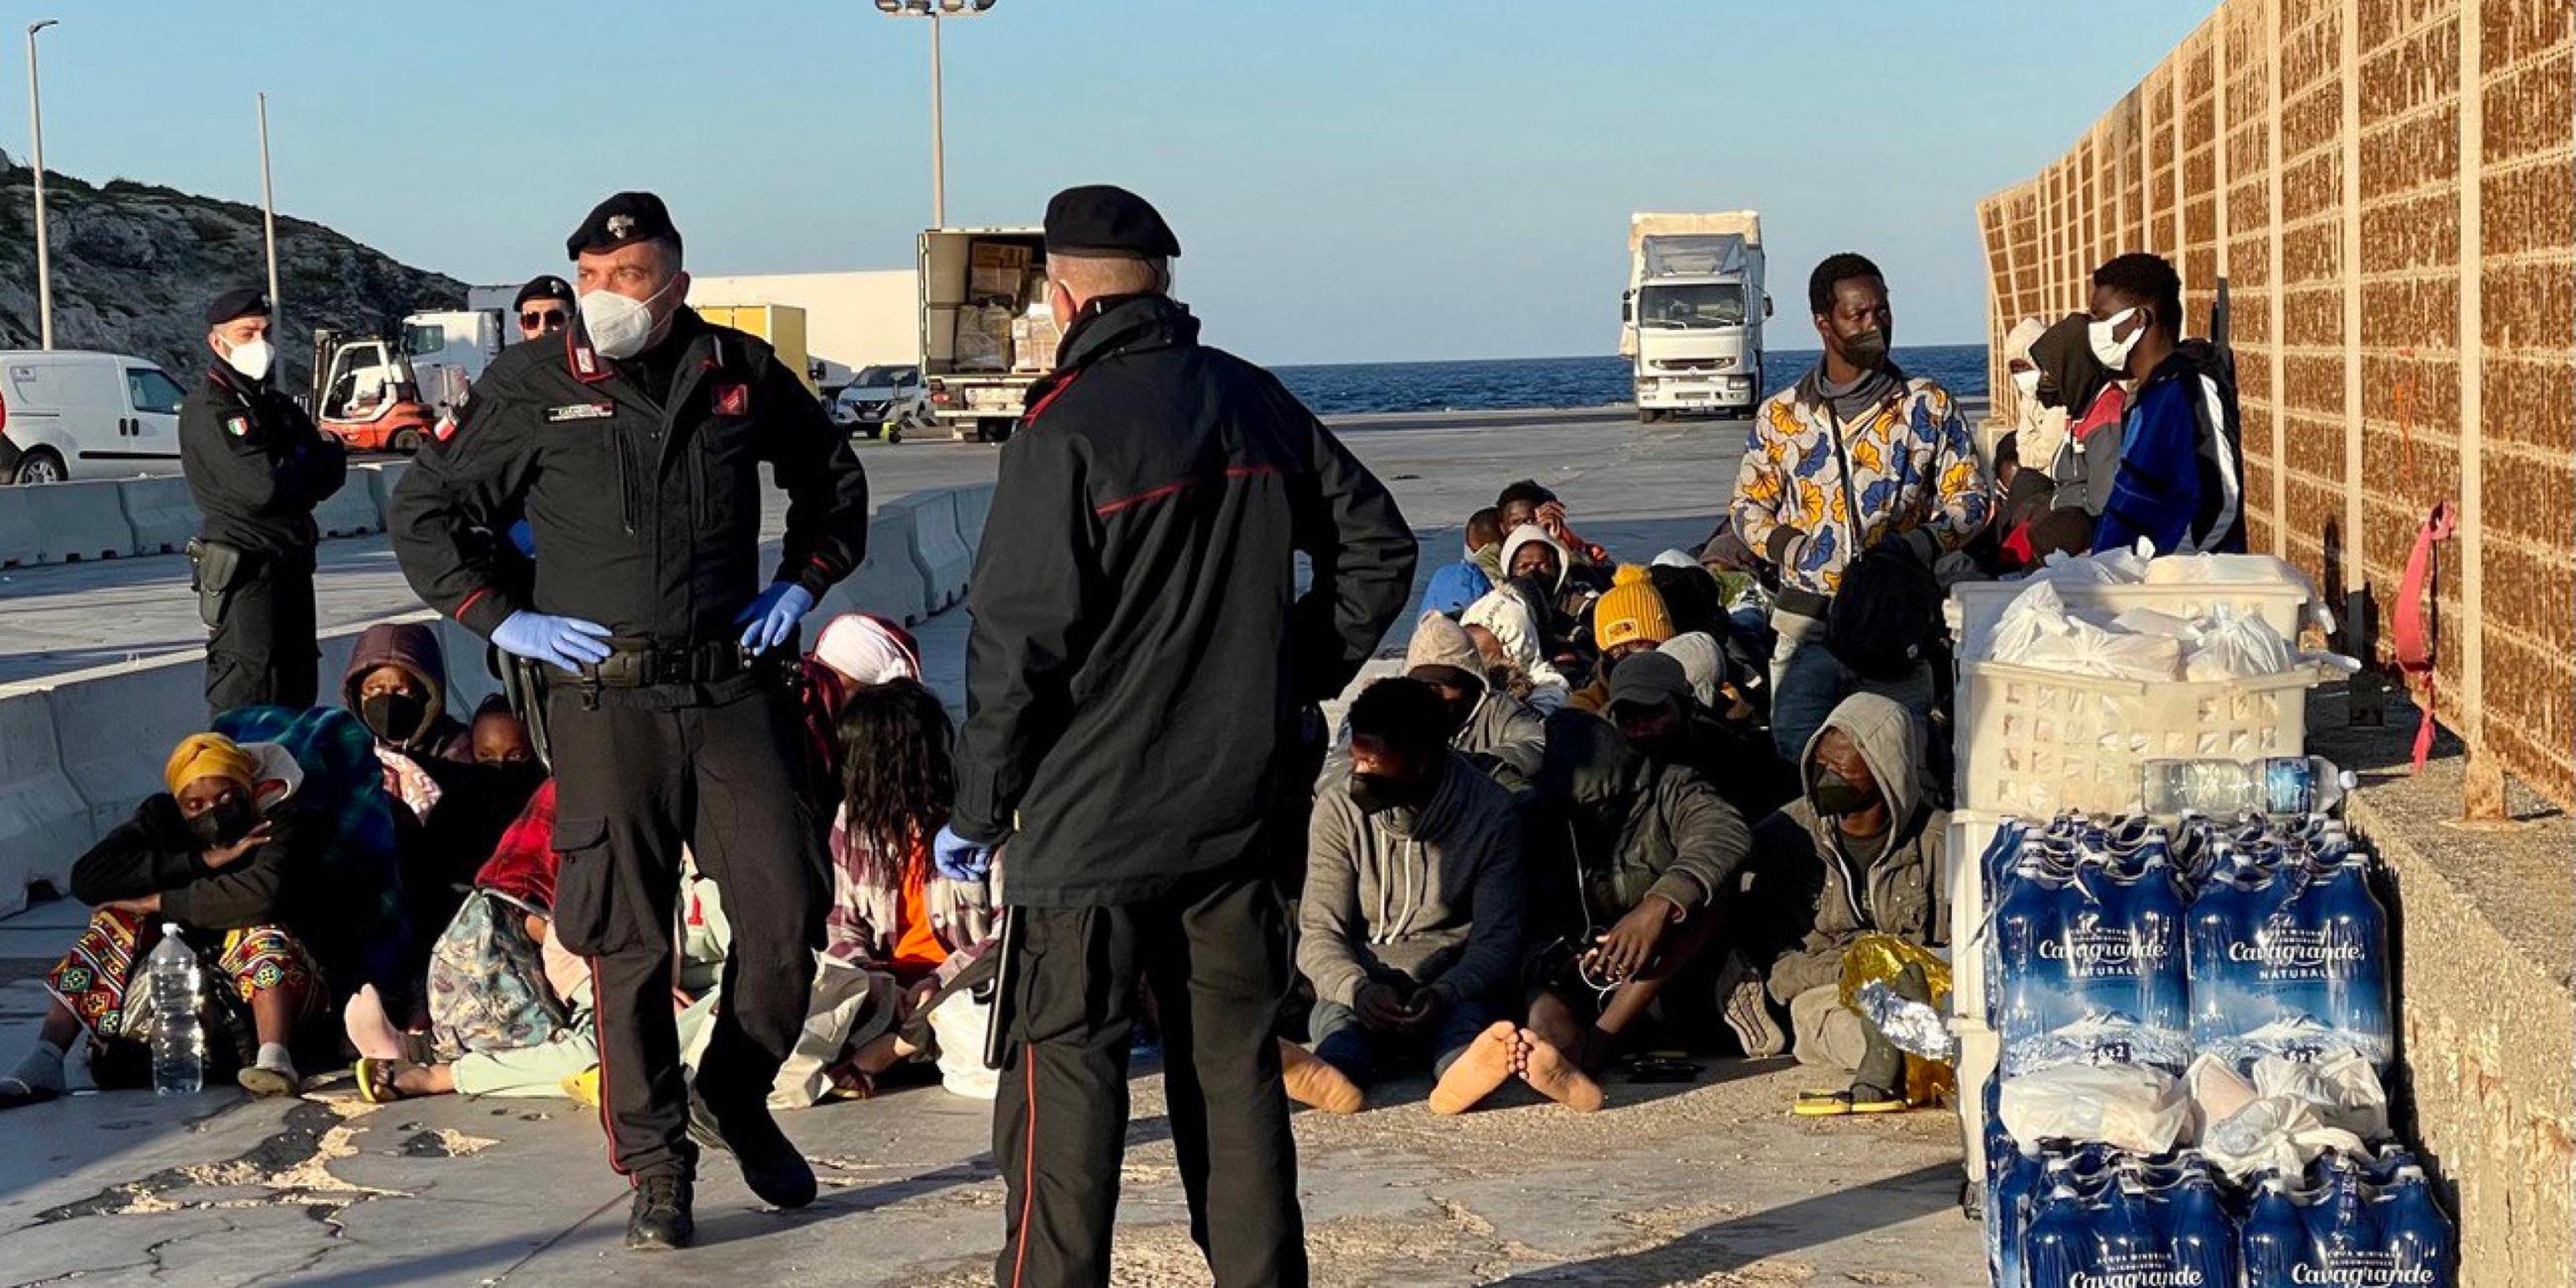 Migrants to leave Lampedusa to another collection center outside the Island